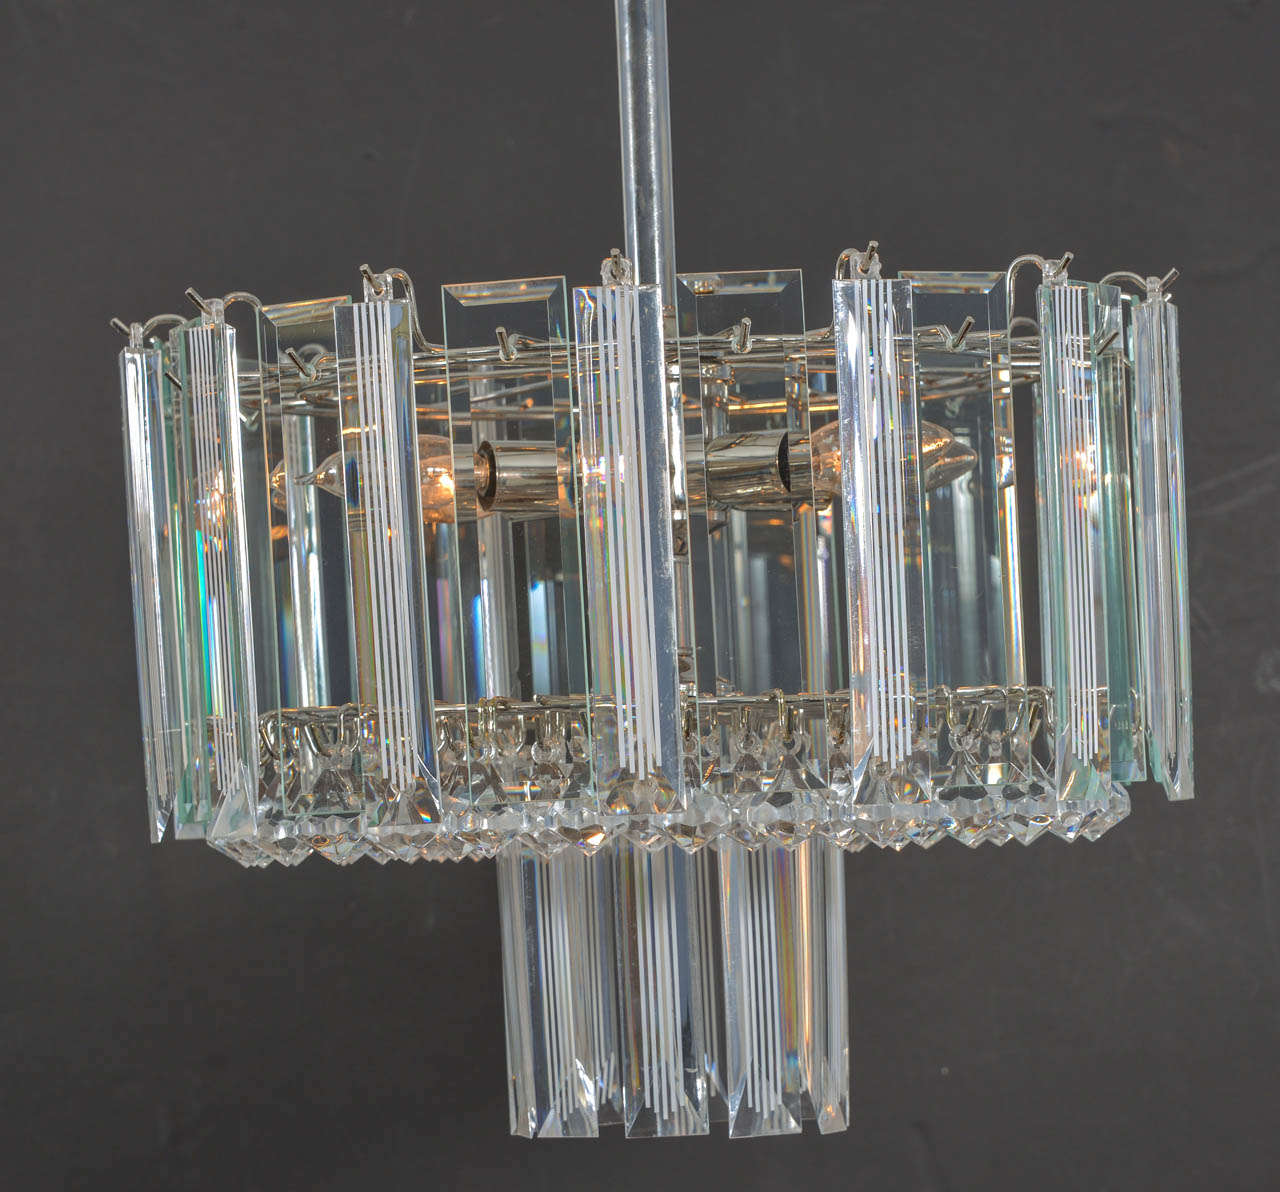 Six-light Mid-Century Modern Lucite chandelier with alternating panels of clear Lucite and decorated stripped Lucite and a bed of small kite shaped pendants hanging from the bottom of the chandelier all hanging from a brass plated frame. A